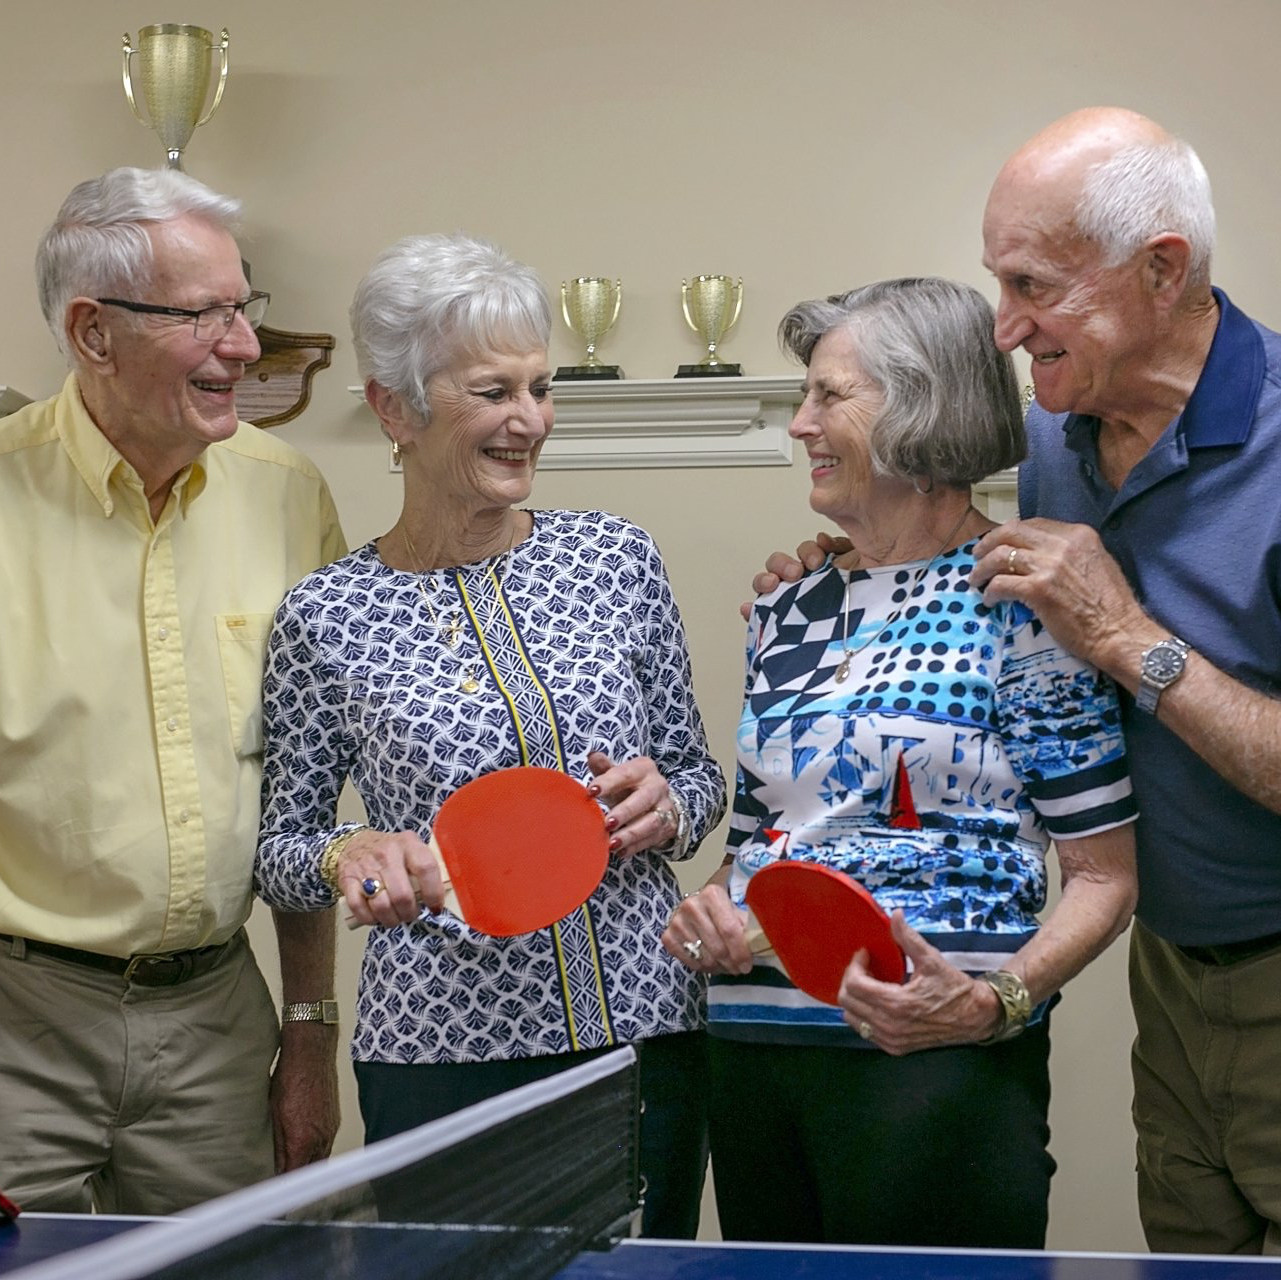 Active, senior living residents talking after playing a game of ping pong at 55+ community